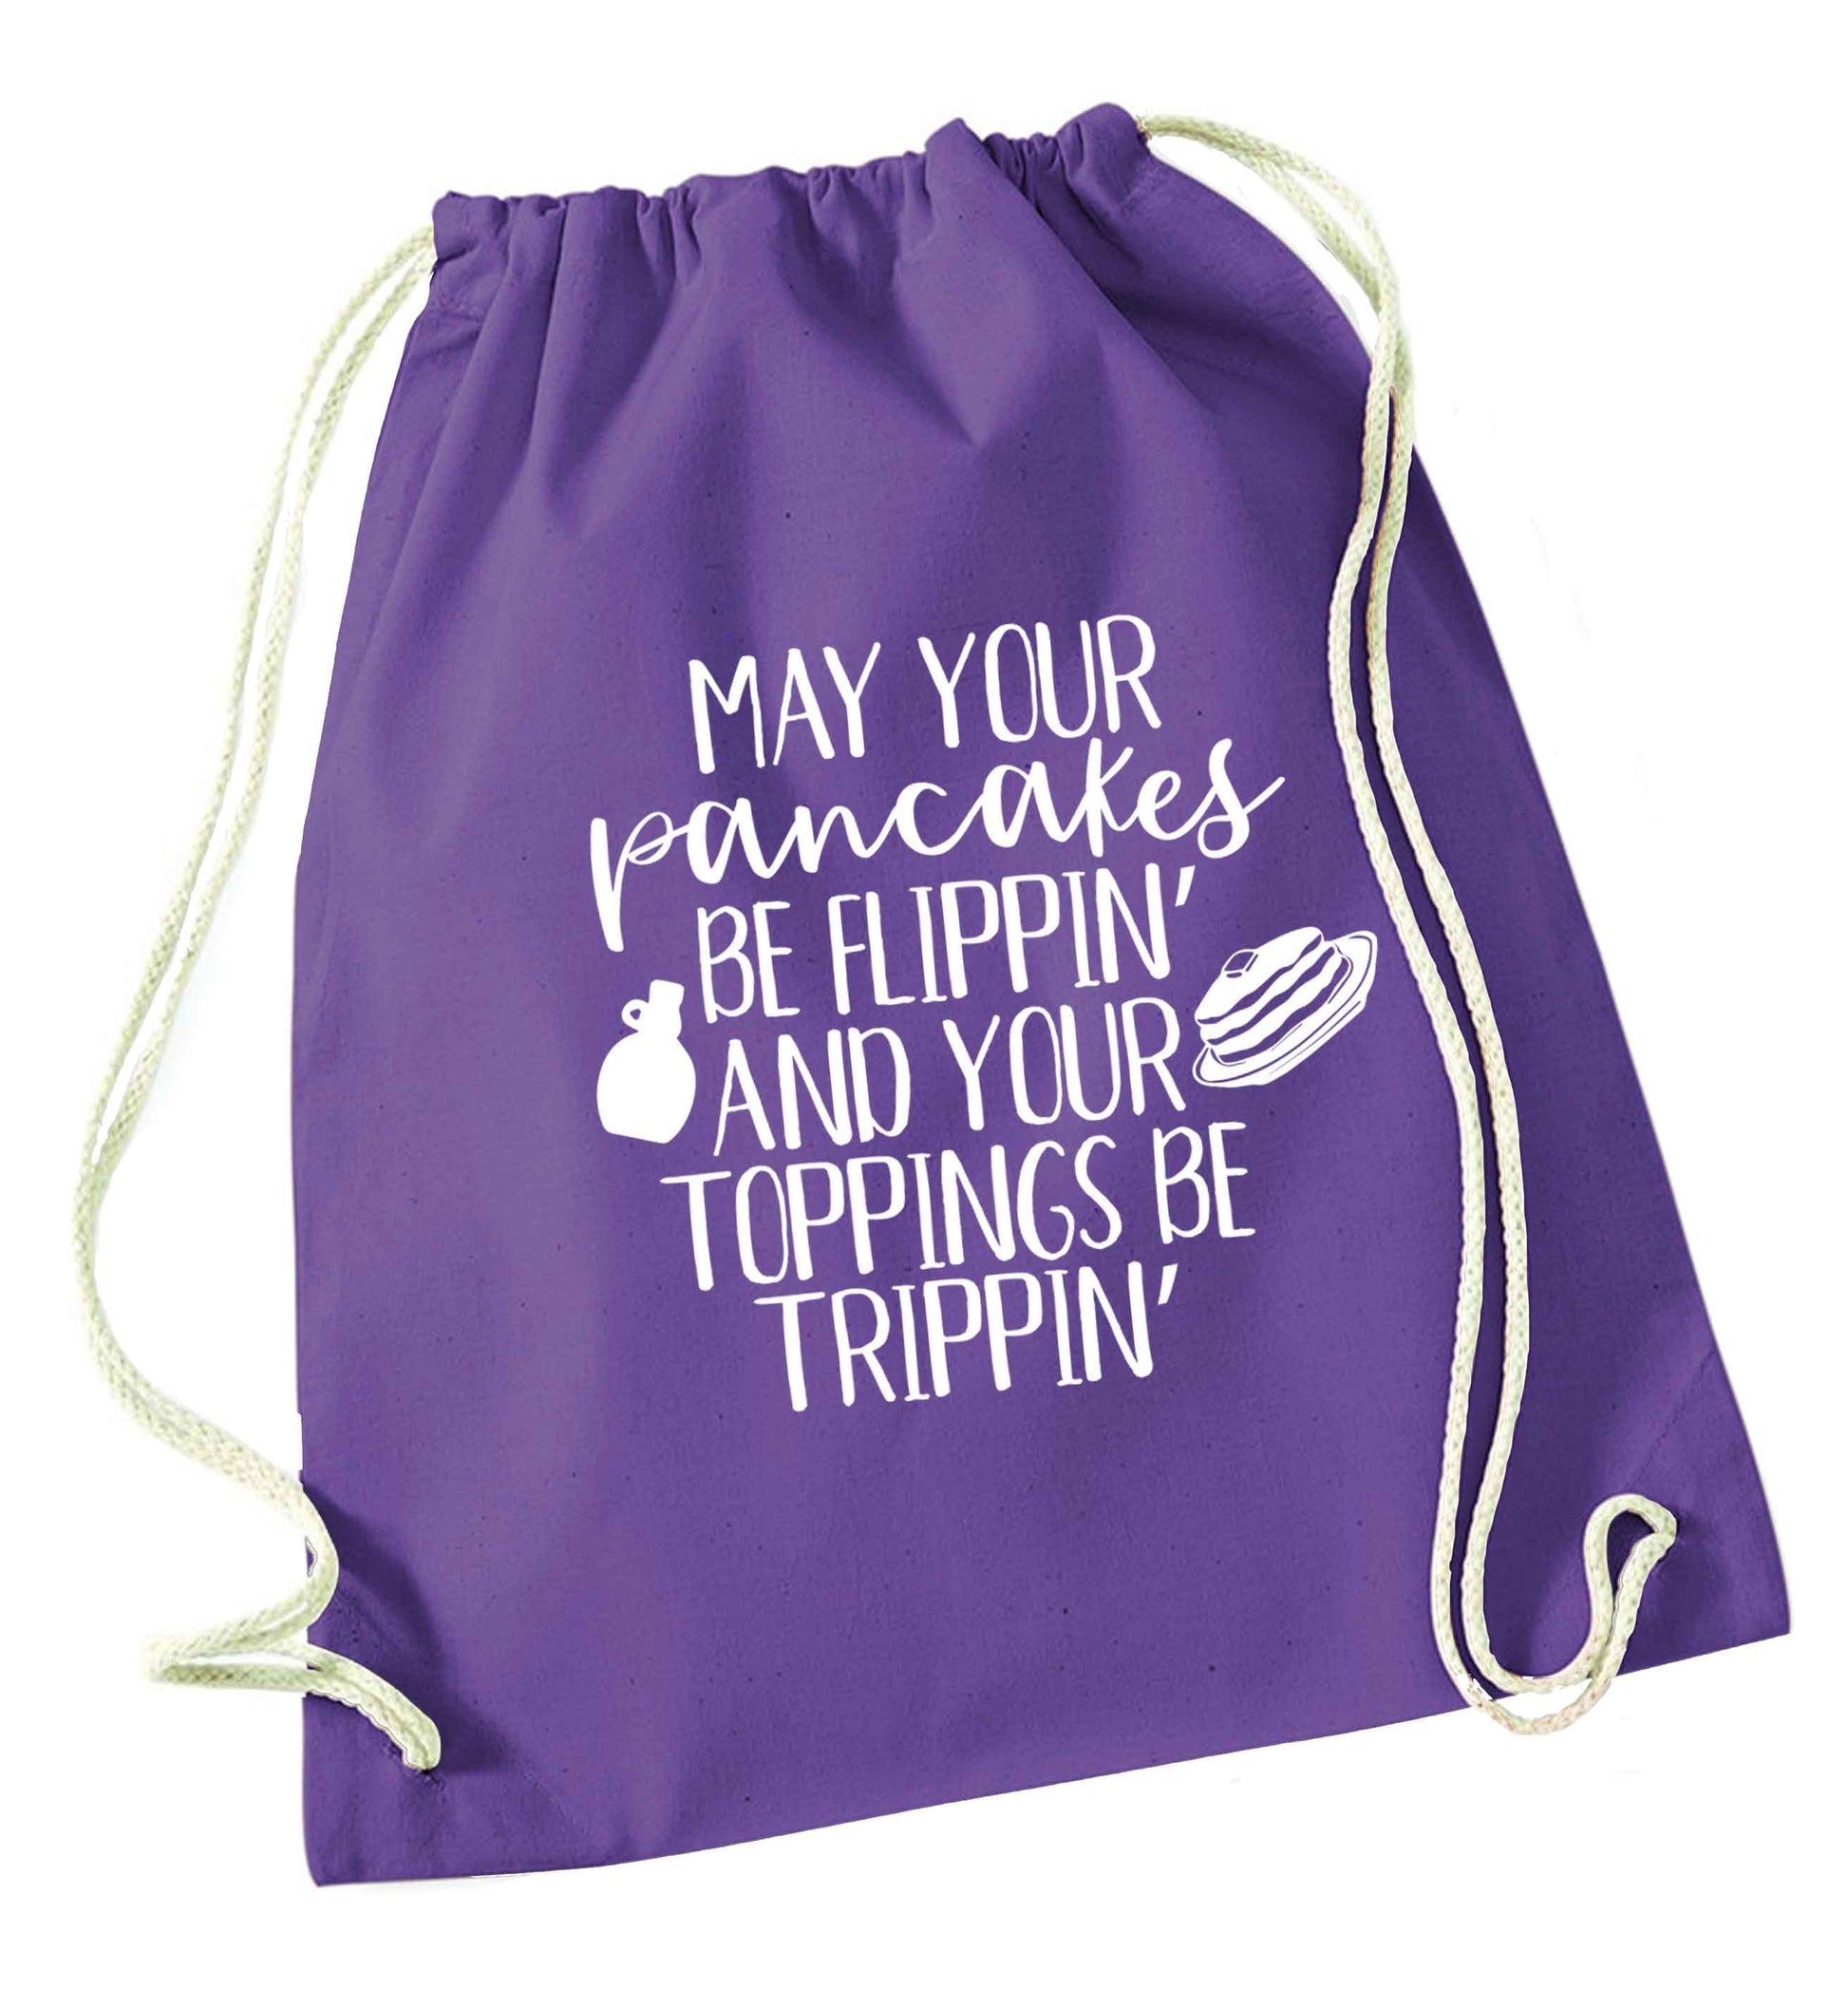 May your pancakes be flippin' and your toppings be trippin' purple drawstring bag